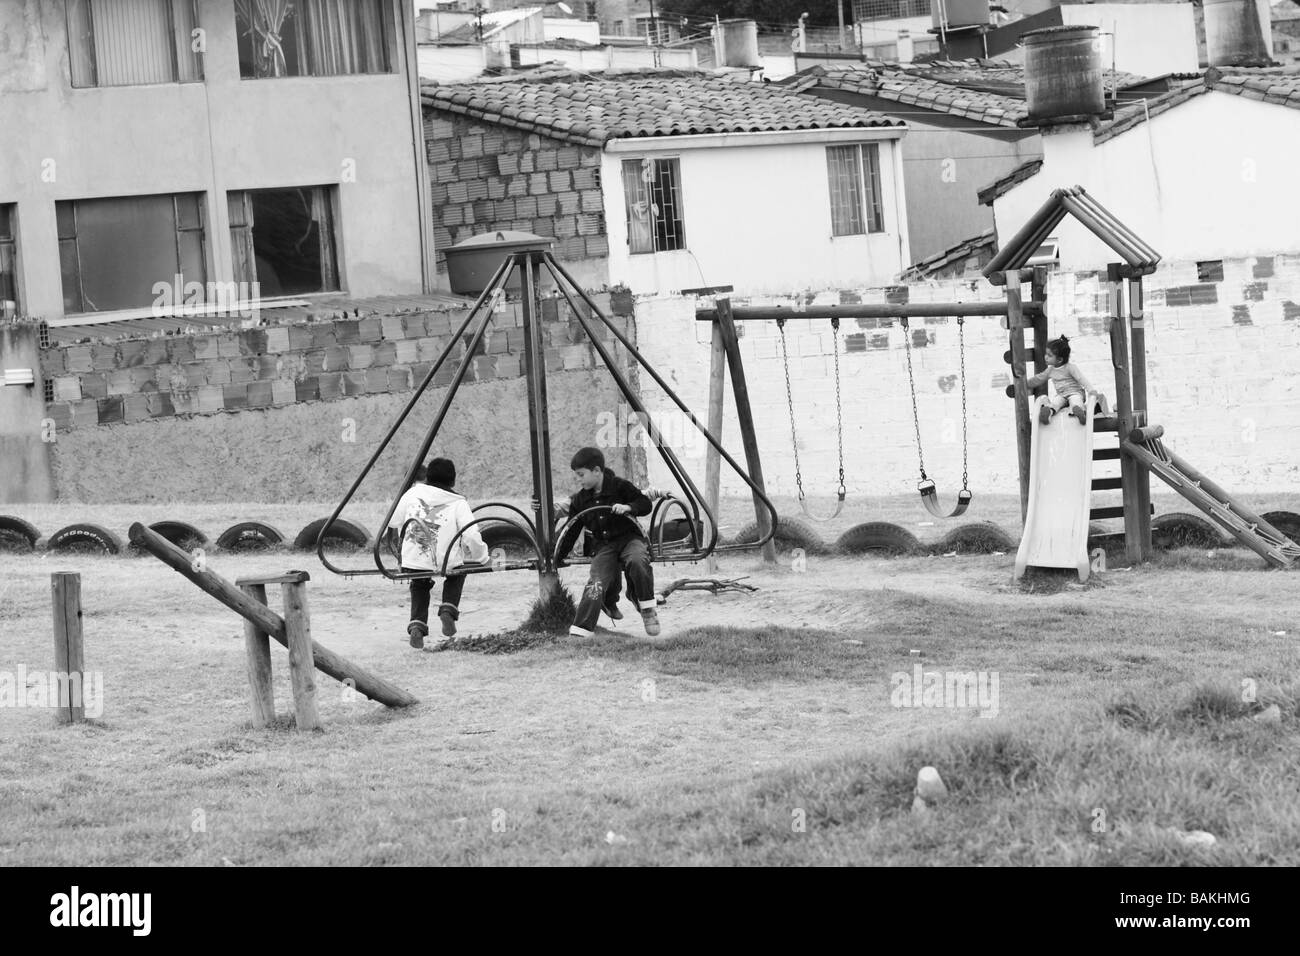 Children playing in a playground, Tunja, Boyacá, Colombia, South America Stock Photo